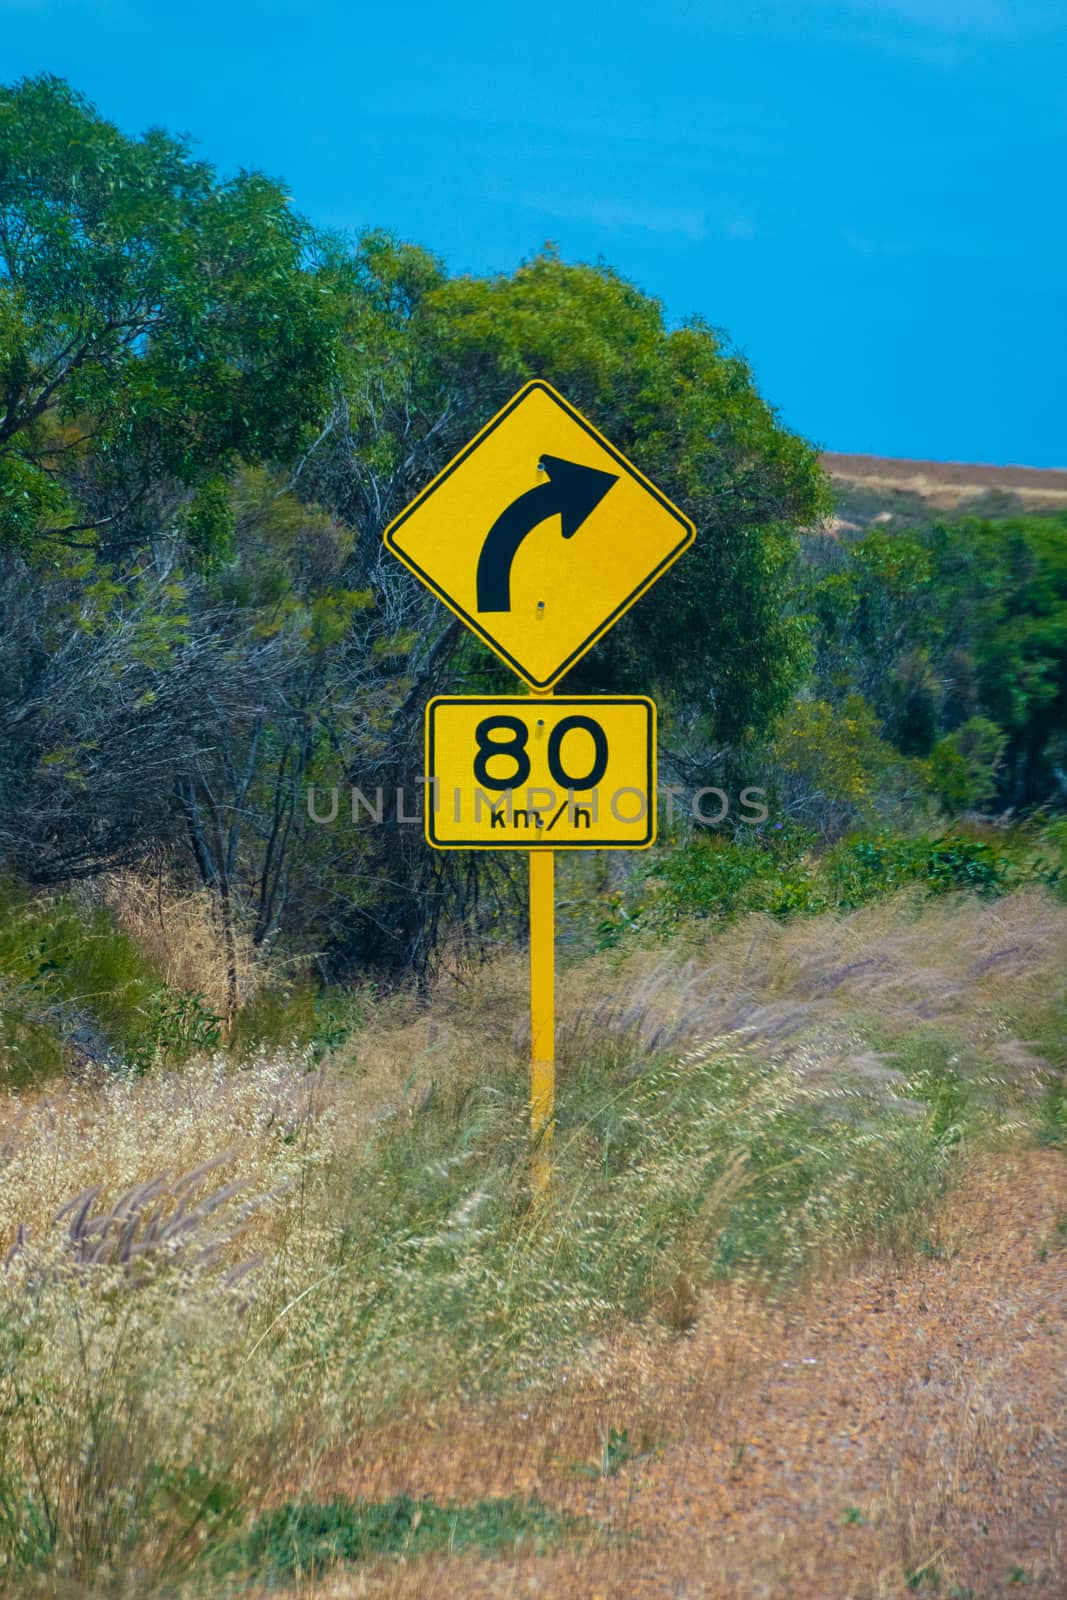 Street sign in Australia warning right curve ahead speed 80 with green trees in background